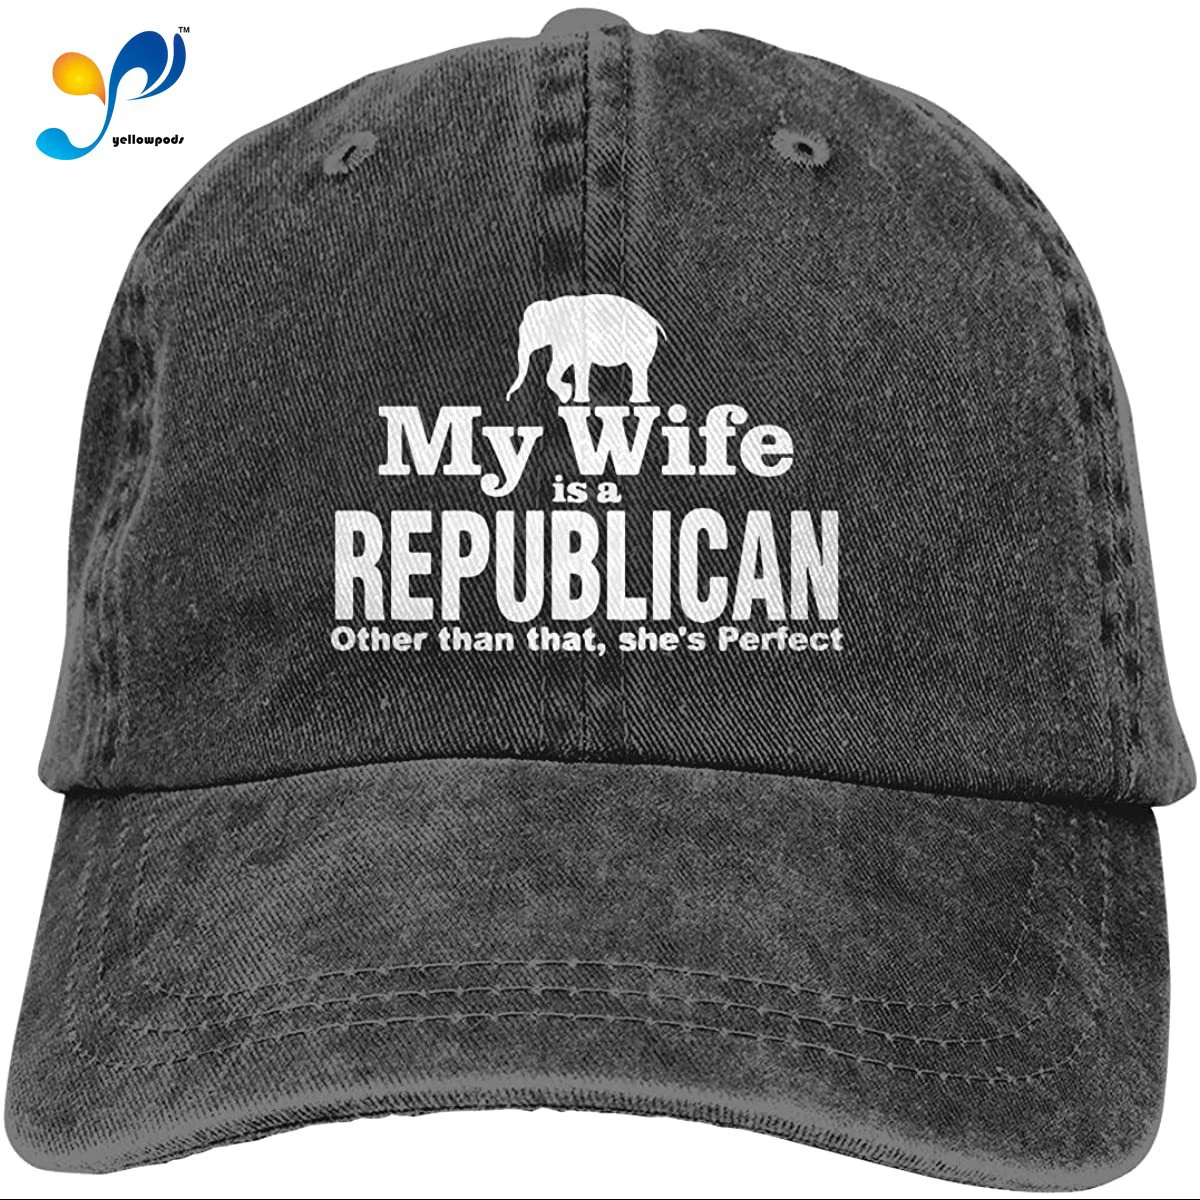 

Republican Right Wing Wife Political Couples Joke Washed Twill Baseball Caps Adjustable Hat Humor Irony Graphics Of Adult Gift